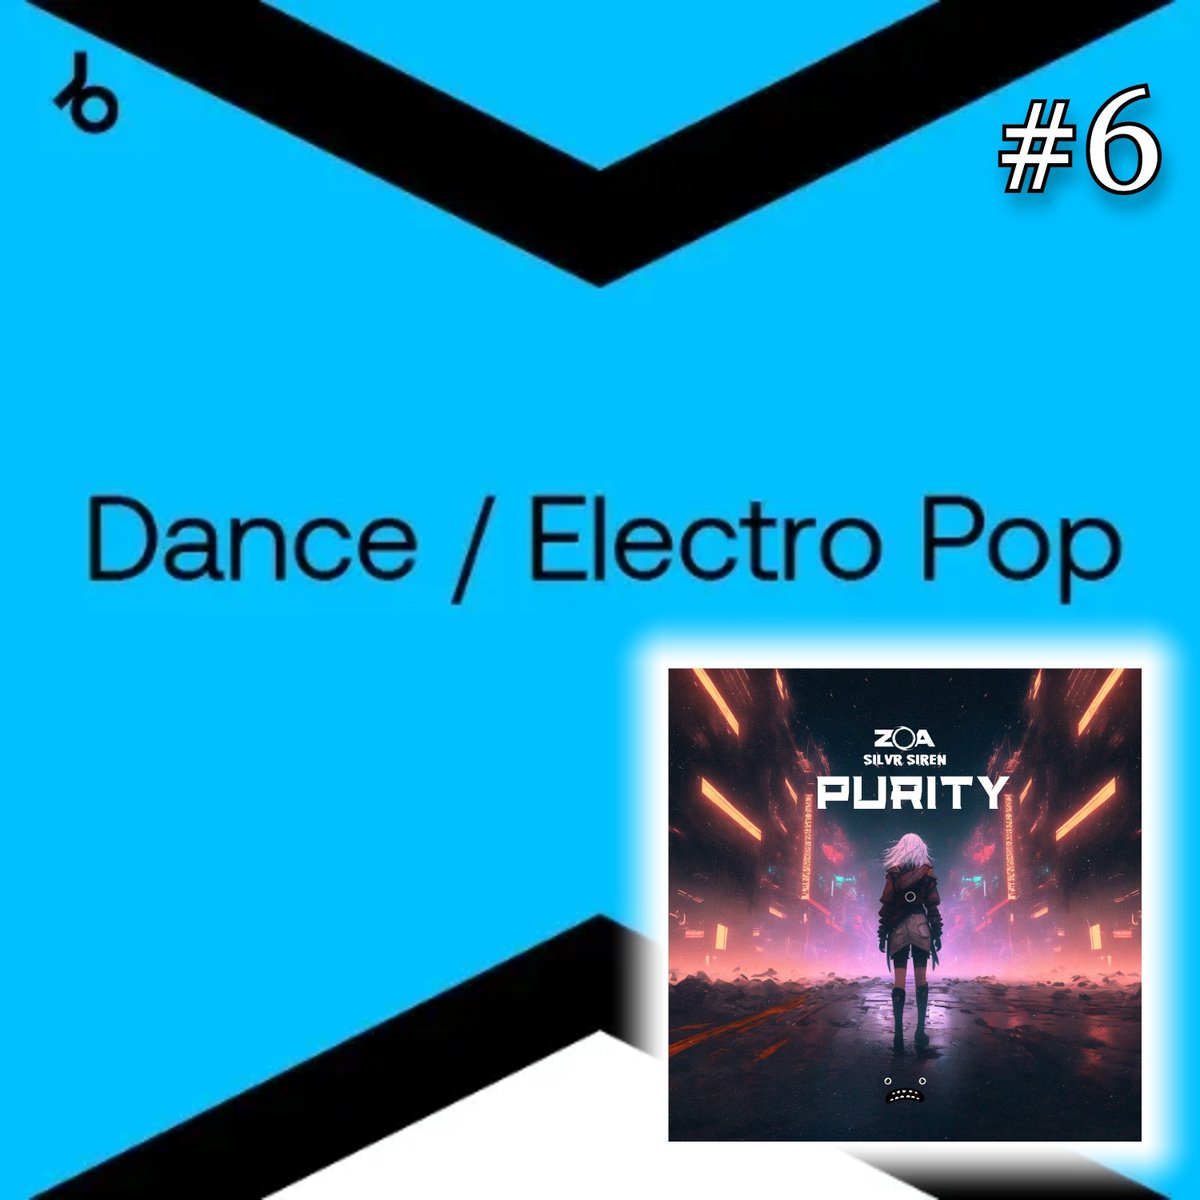 Thanks Beatport for getting our track 'Purity' into #6 on top Dance/Electro Pop! #beatport #edmtwitter #colorbass #edmvocals